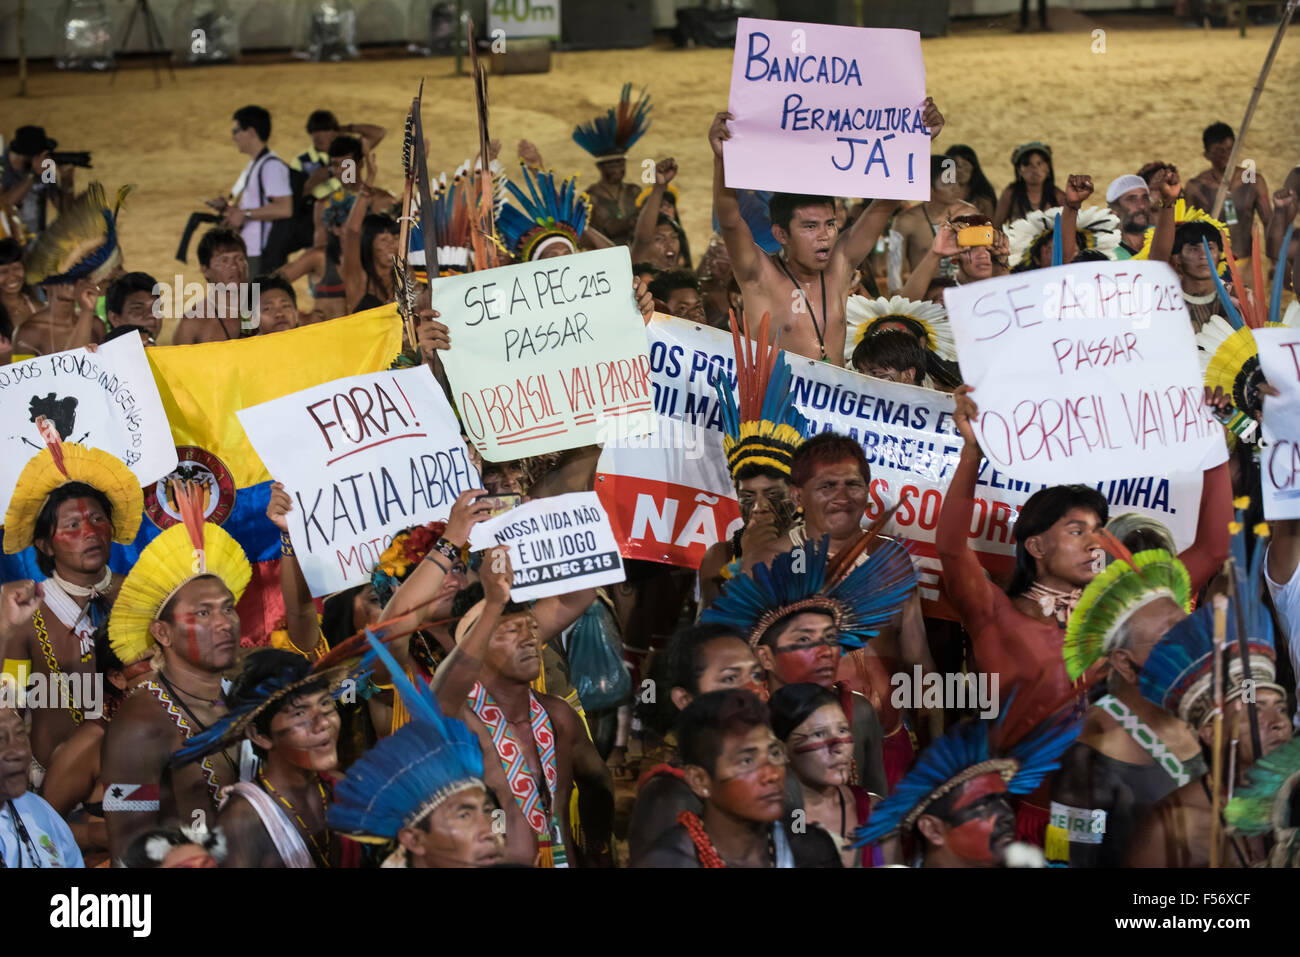 Palmas, Brtazil. 28th Oct, 2015. Indigenous people wave banners in protest against PEC 215, a proposal to amend the Brazilian constitution to water down indigenous rights during the International Indigenous Games, in the city of Palmas, Tocantins State, Brazil. Credit:  Sue Cunningham Photographic/Alamy Live News Stock Photo